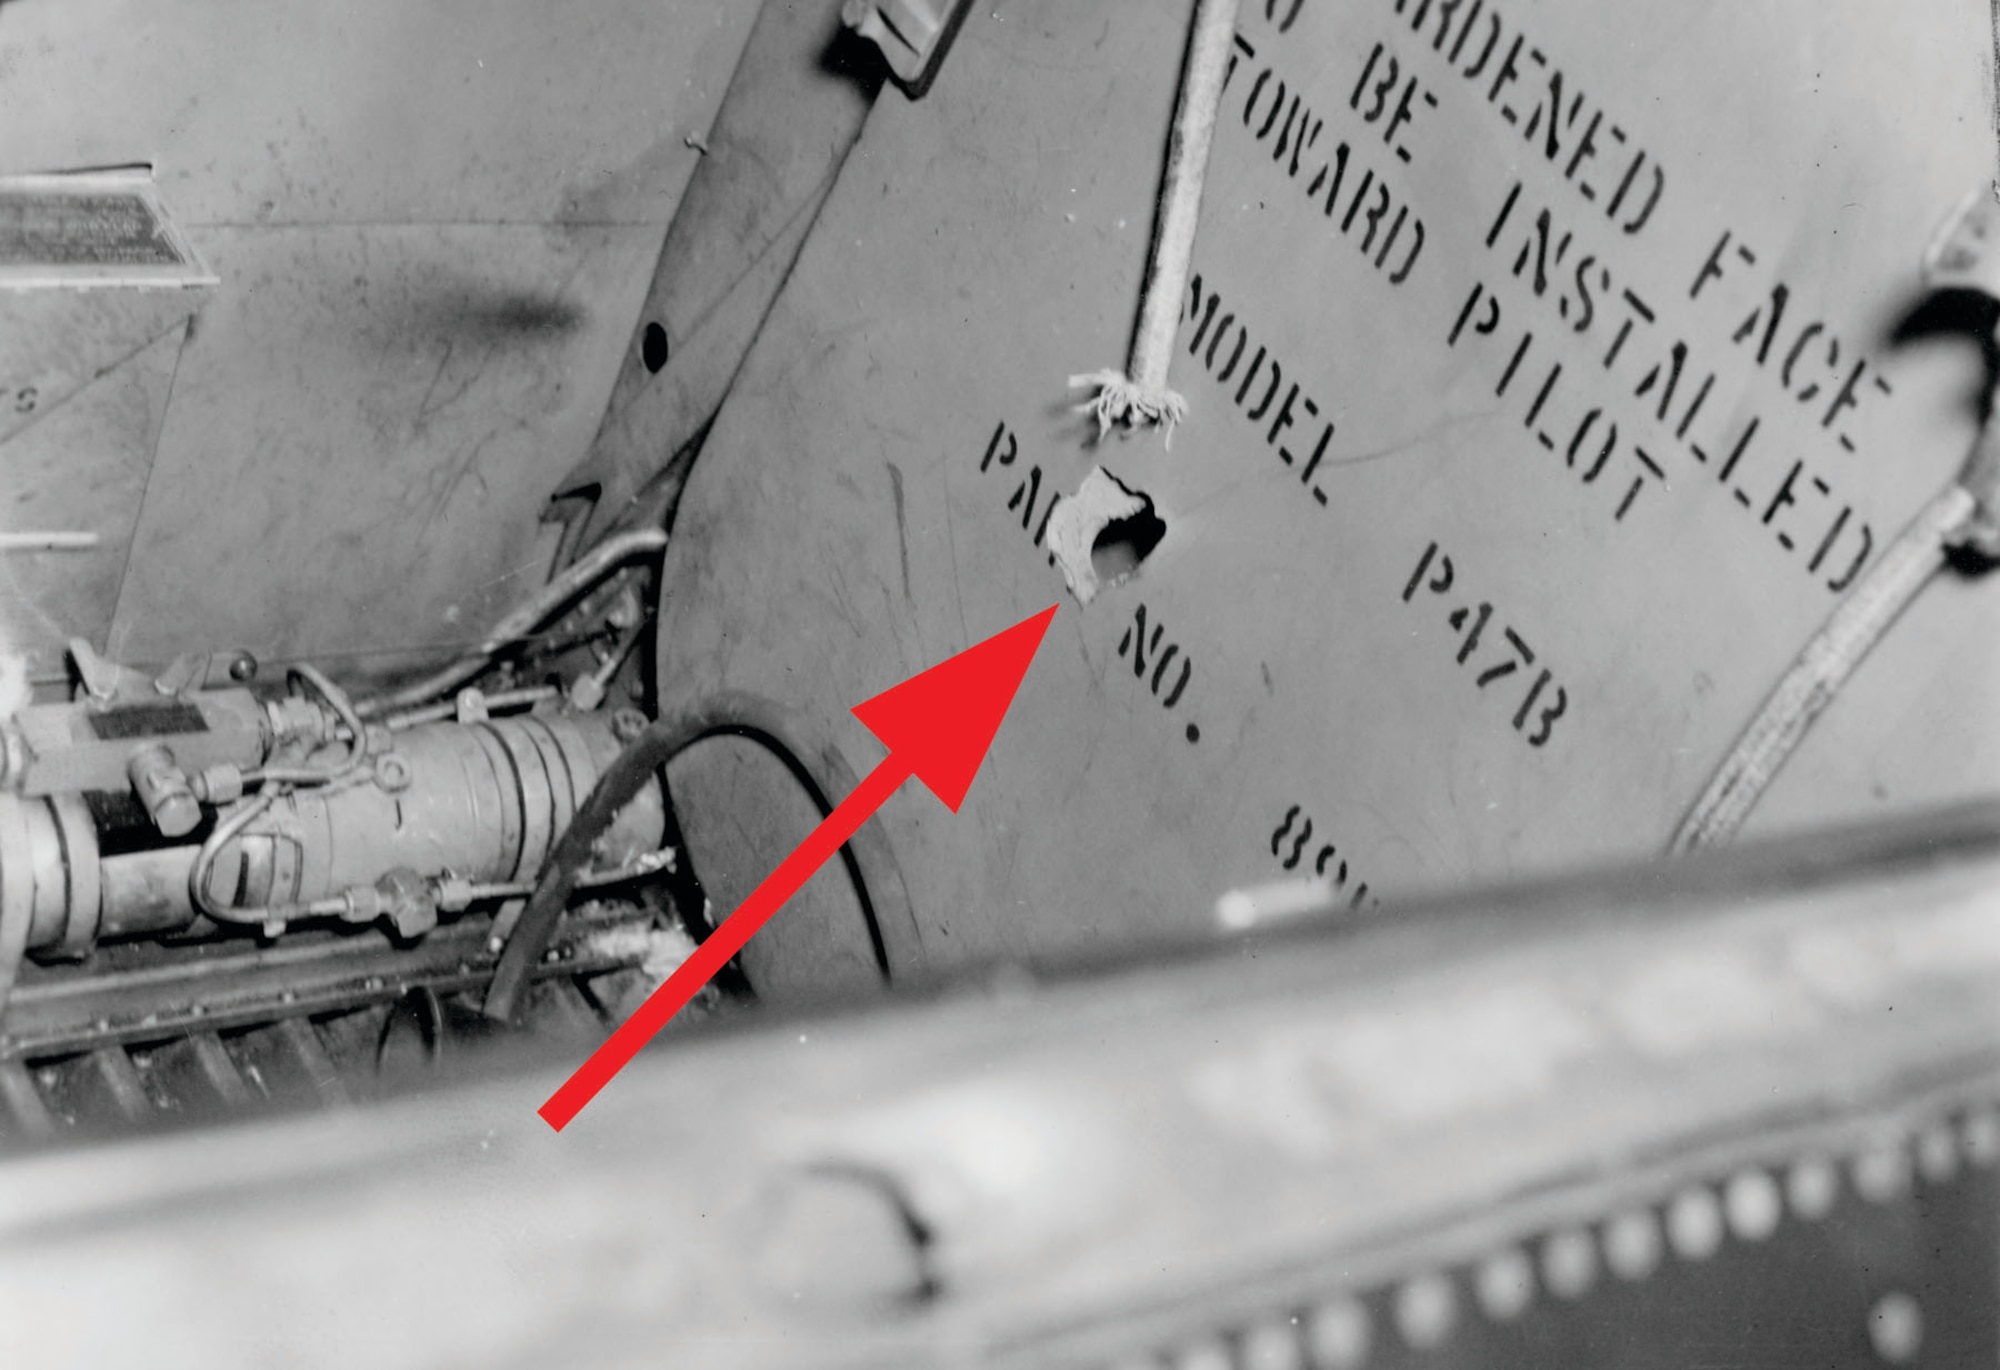 Most tactical fighter-bomber units flew the Thunderbolt, which was an excellent aircraft for the mission. One important feature of the P-47 was its ruggedness, due in part to armor plating in vital areas. These pieces of armor protected the pilot from the front and from behind. (U.S. Air Force photo)